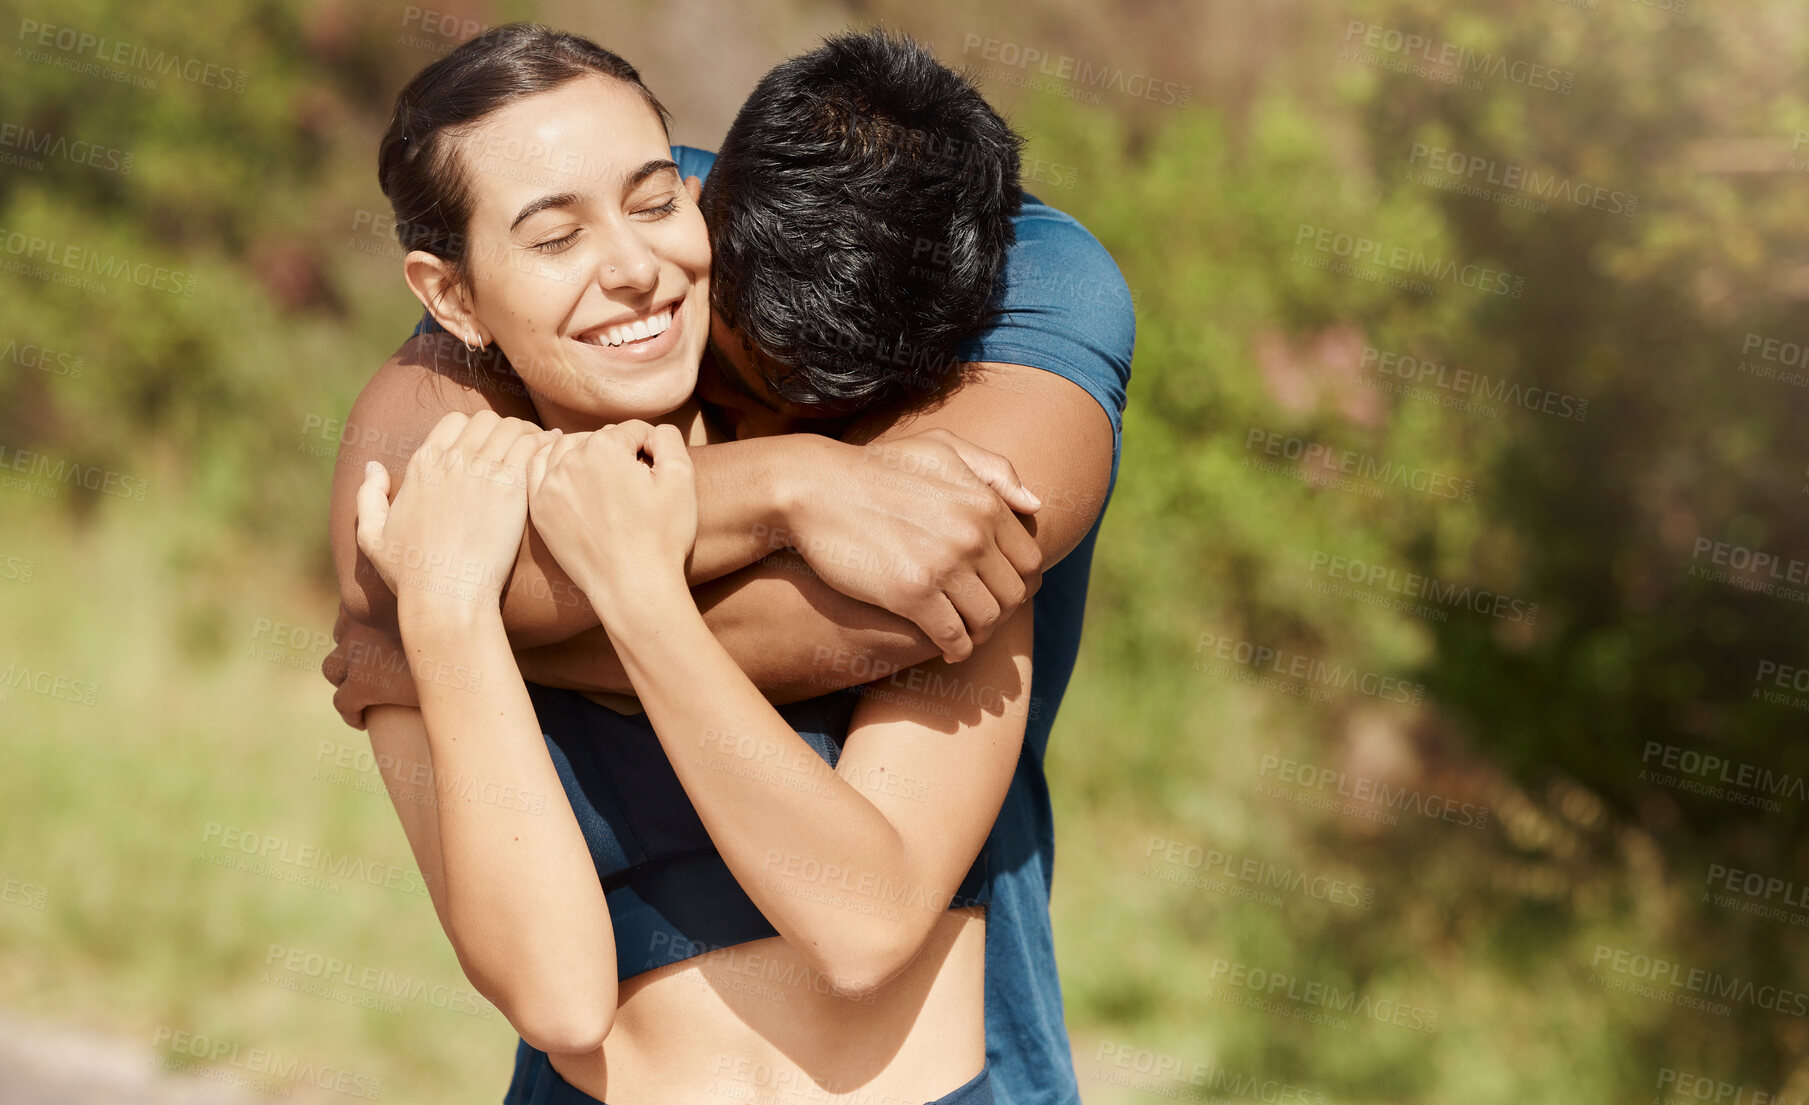 Buy stock photo Affectionate young interracial couple taking a break from exercise and run outdoors. Loving man hugging arm around woman while motivating each other towards better health and fitness